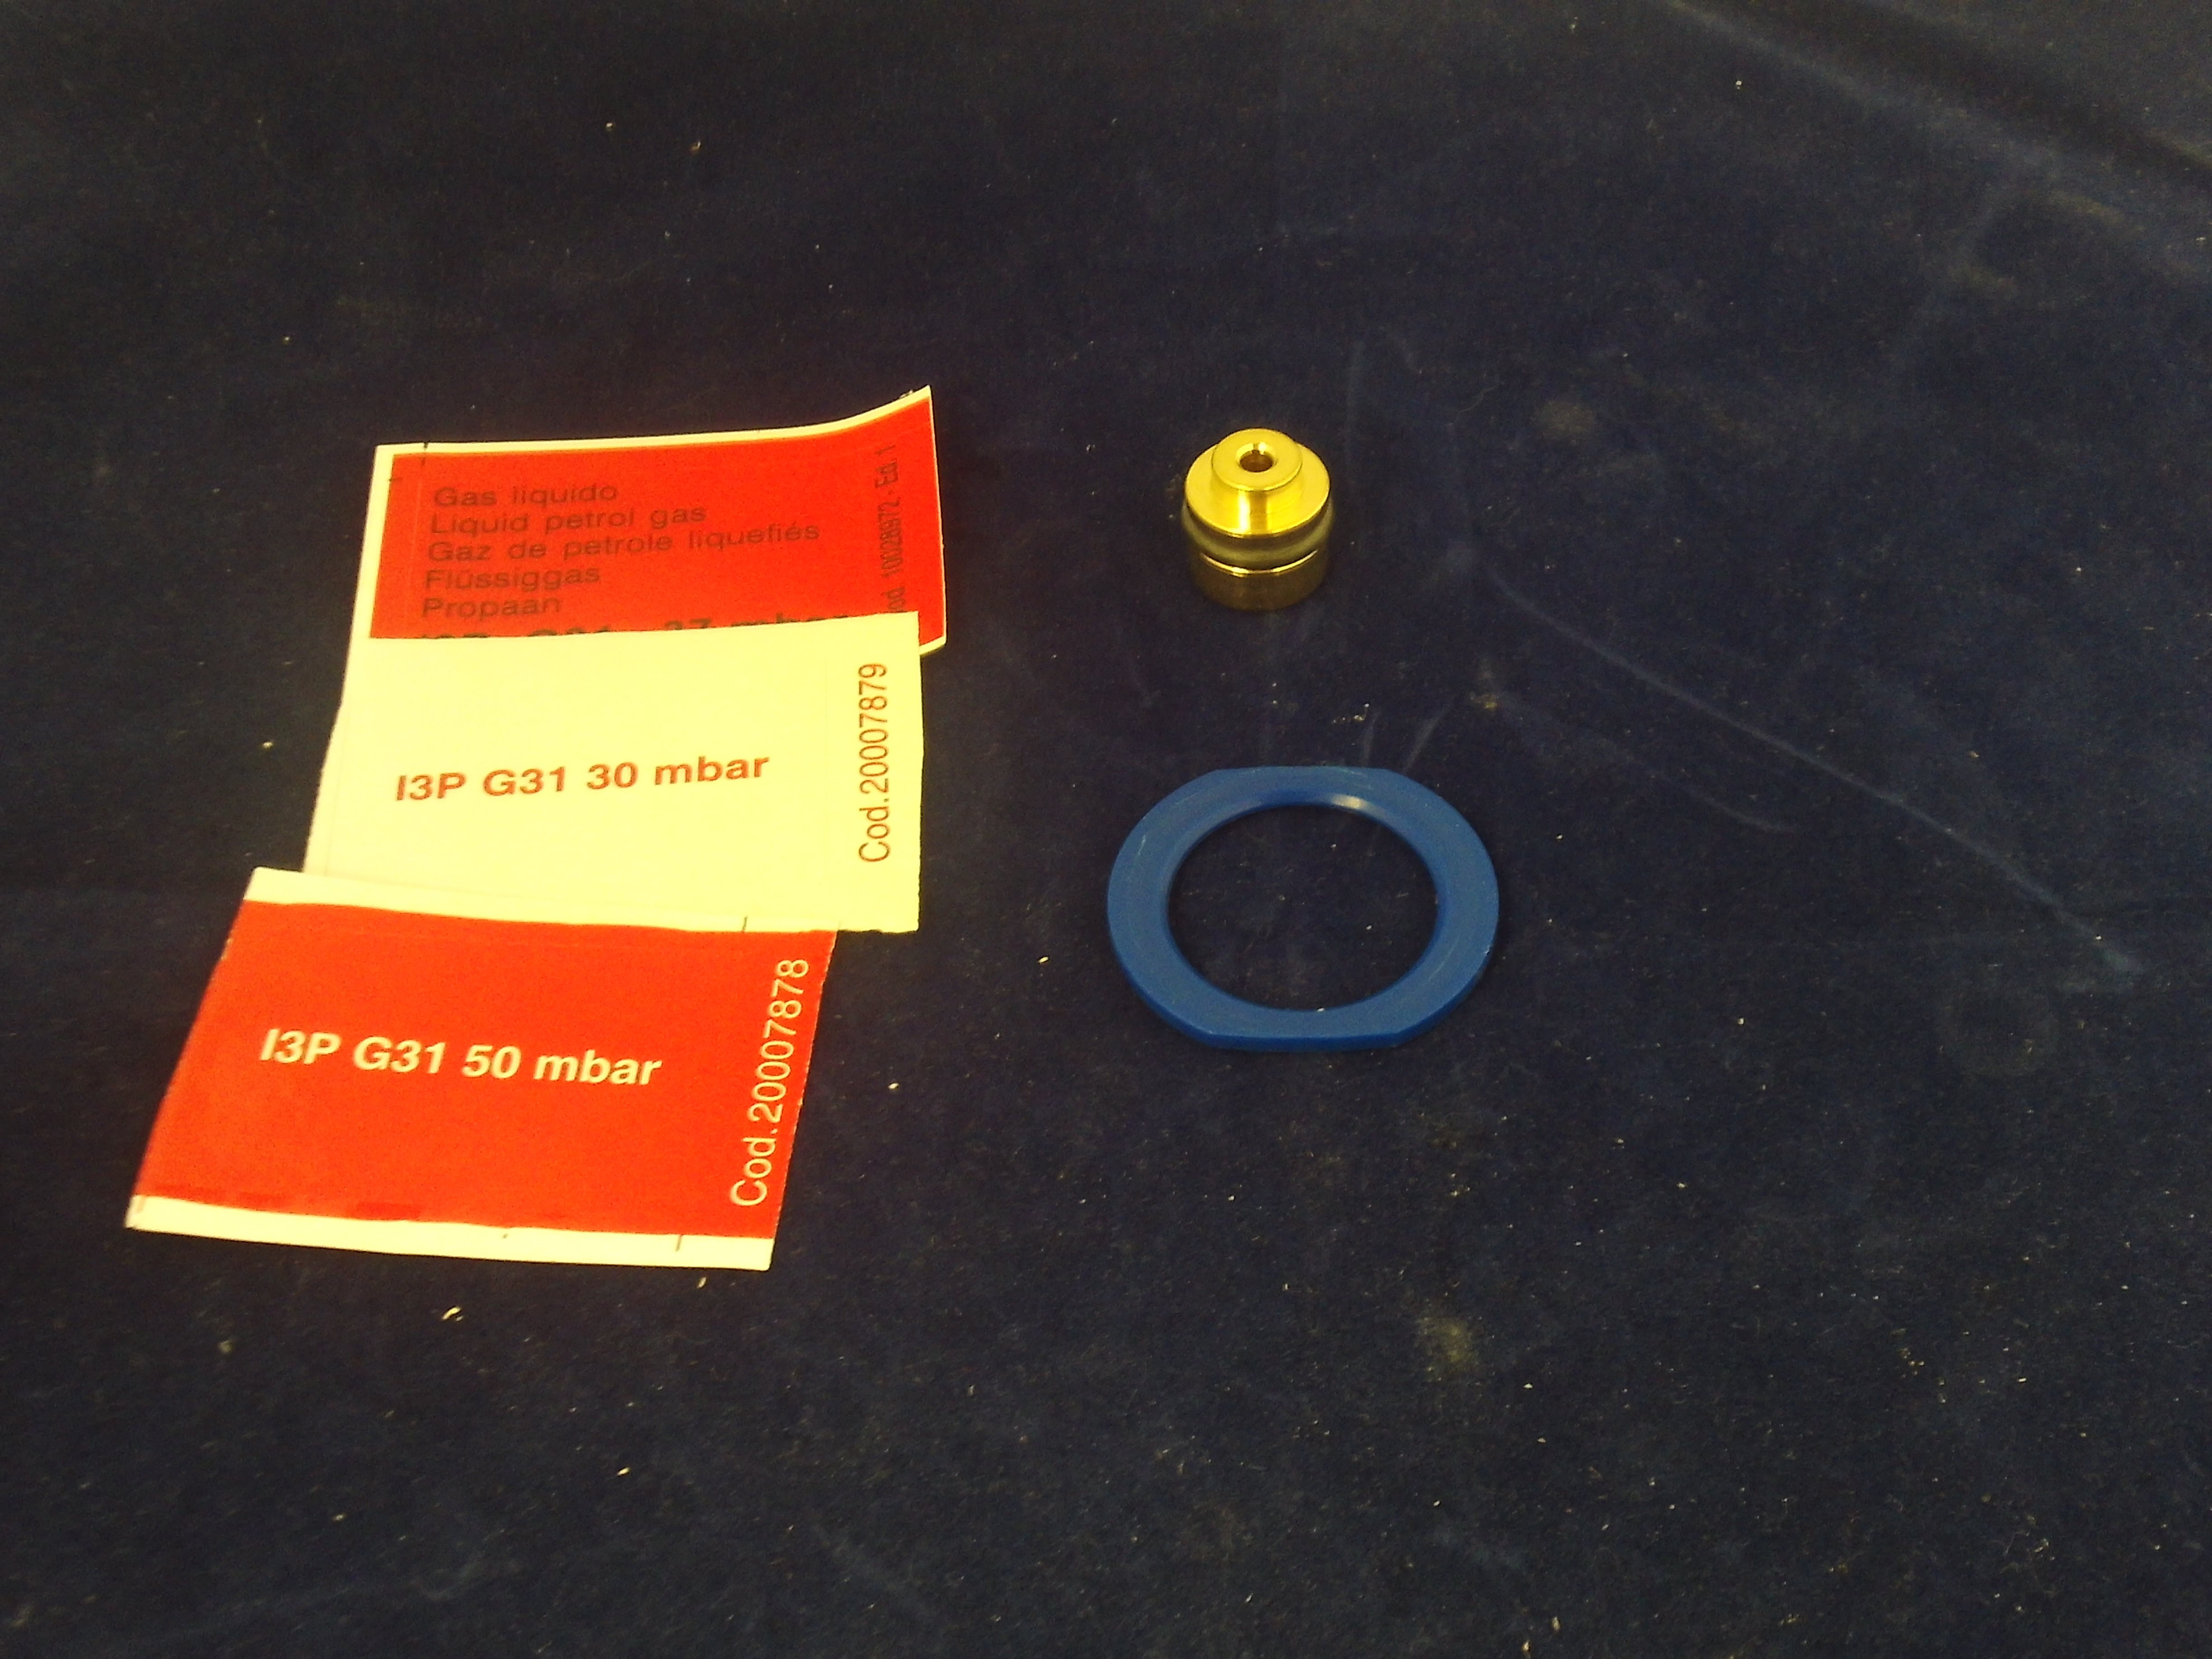 NG to LPG conversion kit Jet and Blue Flange